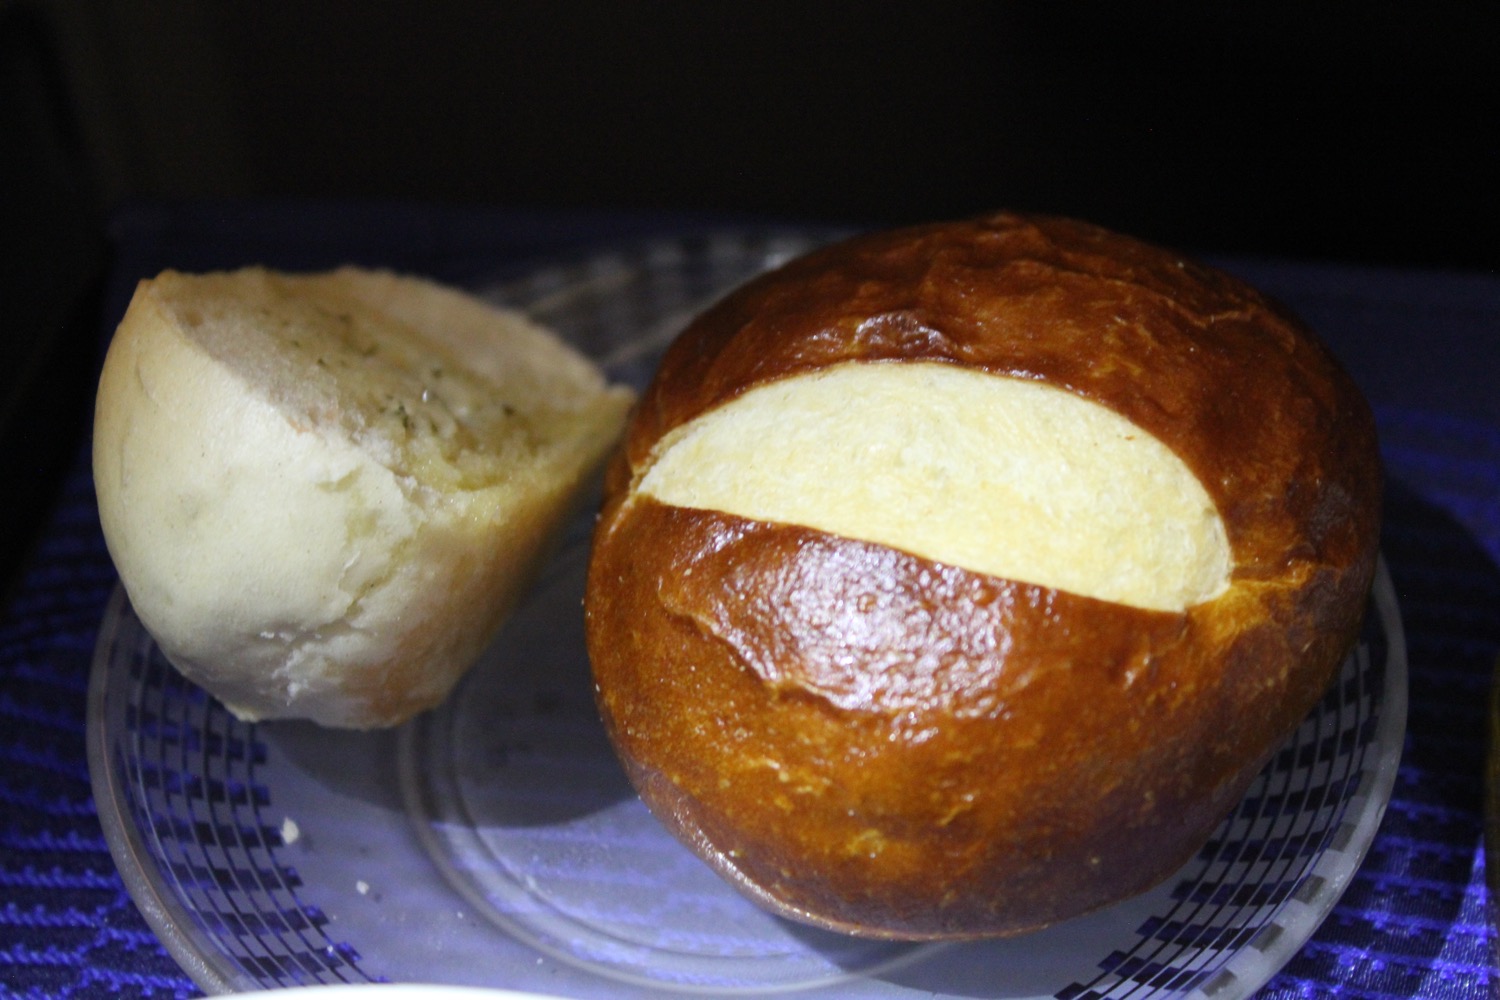 a loaf of bread on a plate